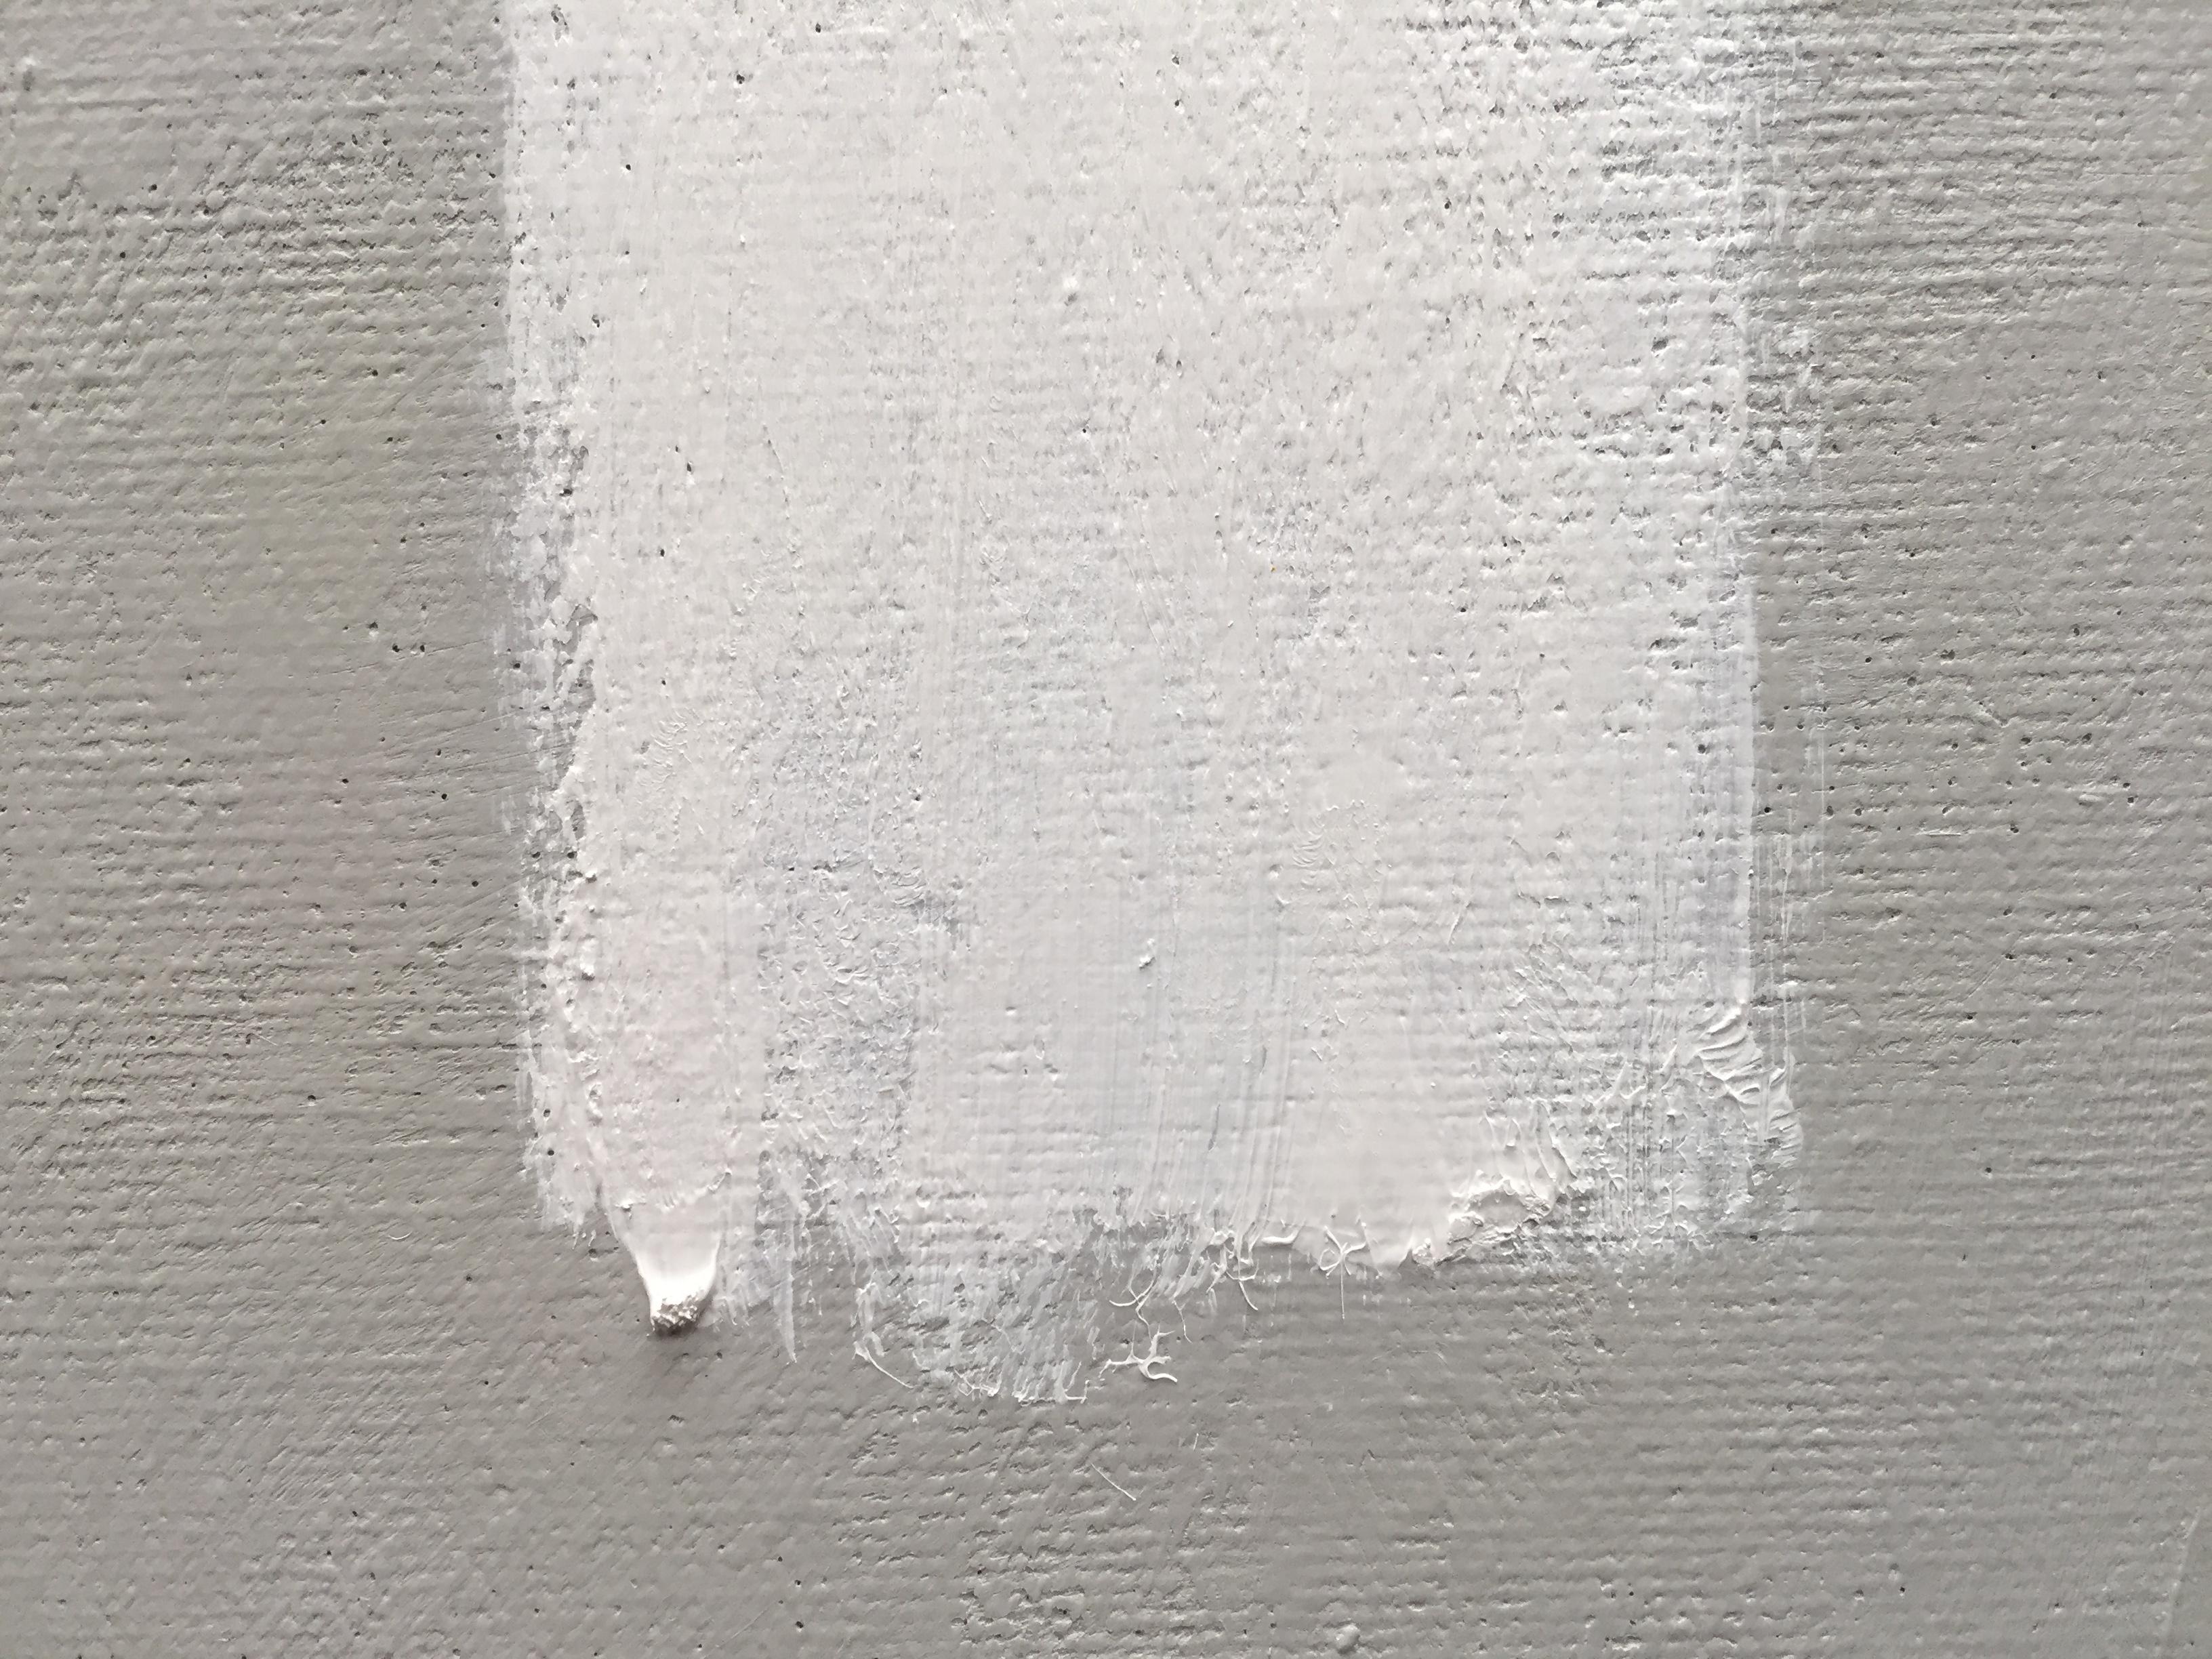 Contemporary abstract painting, modern and minimal. With its grey and white palette, emphasis is placed on simplifying the composition. Layers of paint build up a quiet texture in this understated yet commanding artwork. 

To view more of